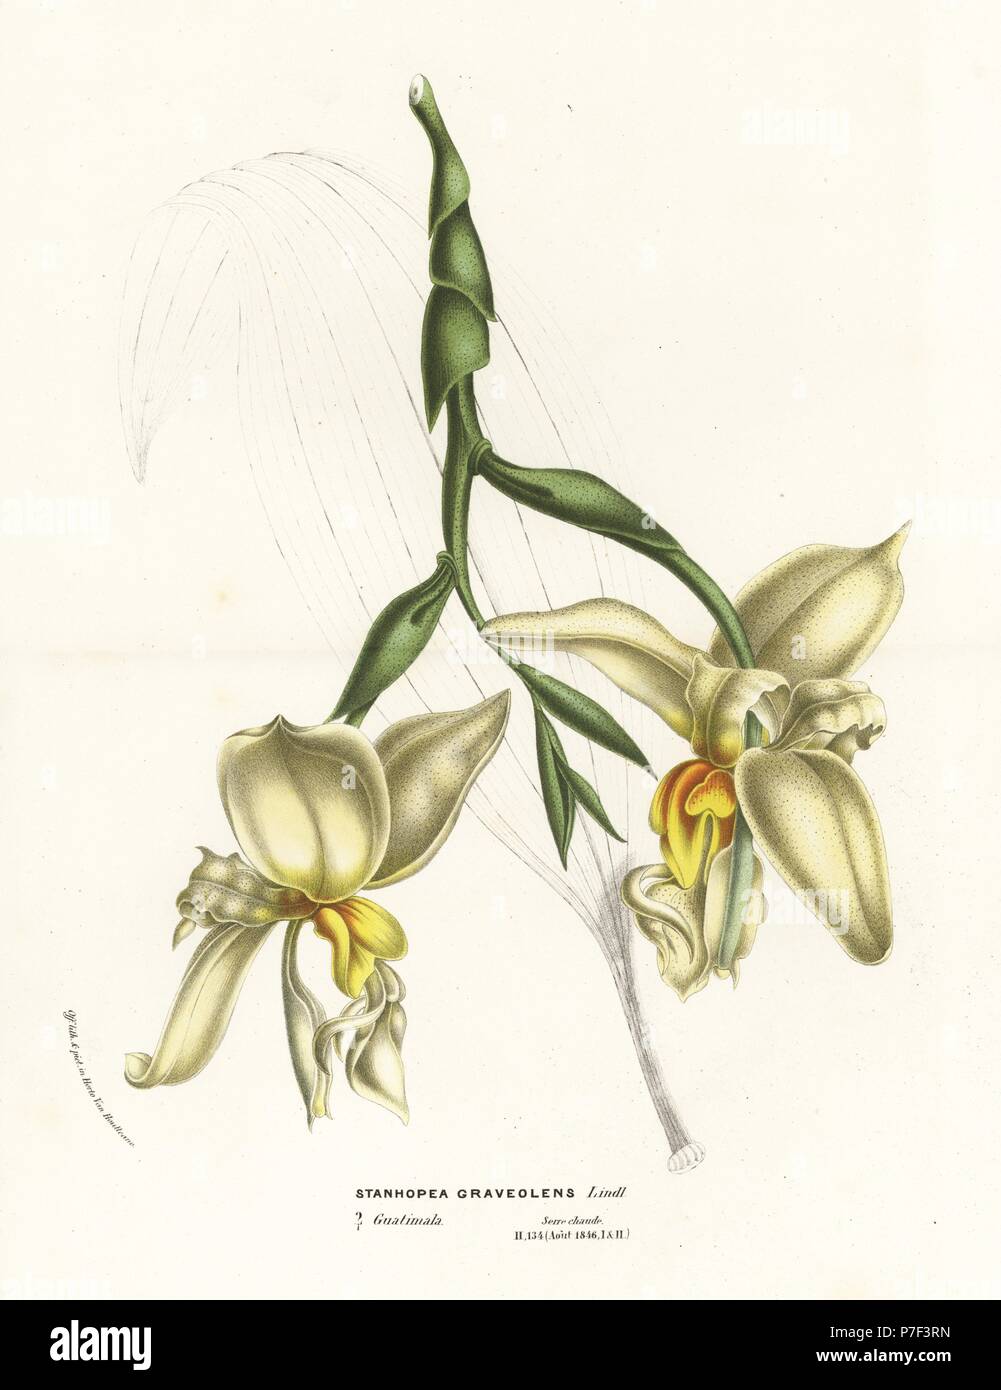 Stanhopea graveolens orchid. Handcoloured lithograph from Louis van Houtte and Charles Lemaire's Flowers of the Gardens and Hothouses of Europe, Flore des Serres et des Jardins de l'Europe, Ghent, Belgium, 1870. Stock Photo